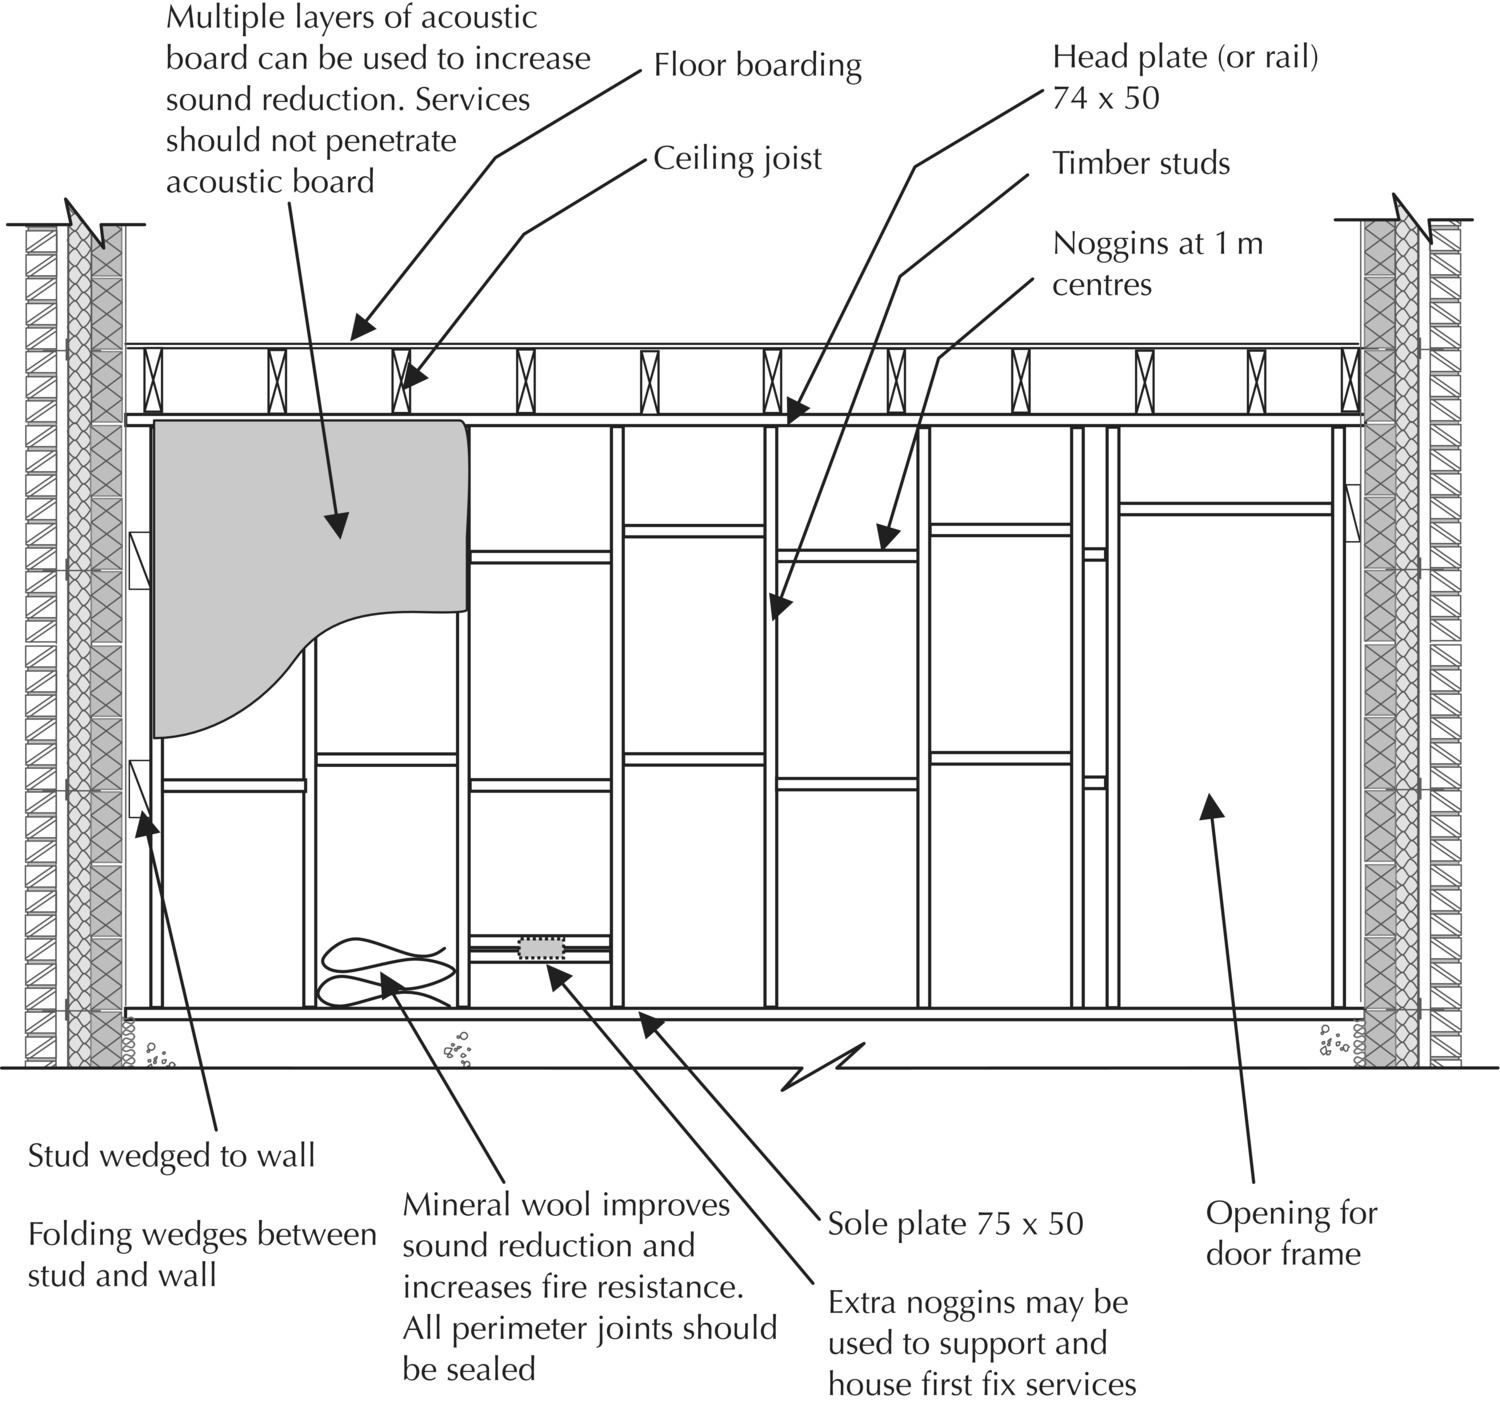 Diagram of timber stud partition wall with arrows indicating stud wedged to wall, folding wedges between stud and wall, multiple layers of acoustic board, floor boarding, ceiling joist, etc.